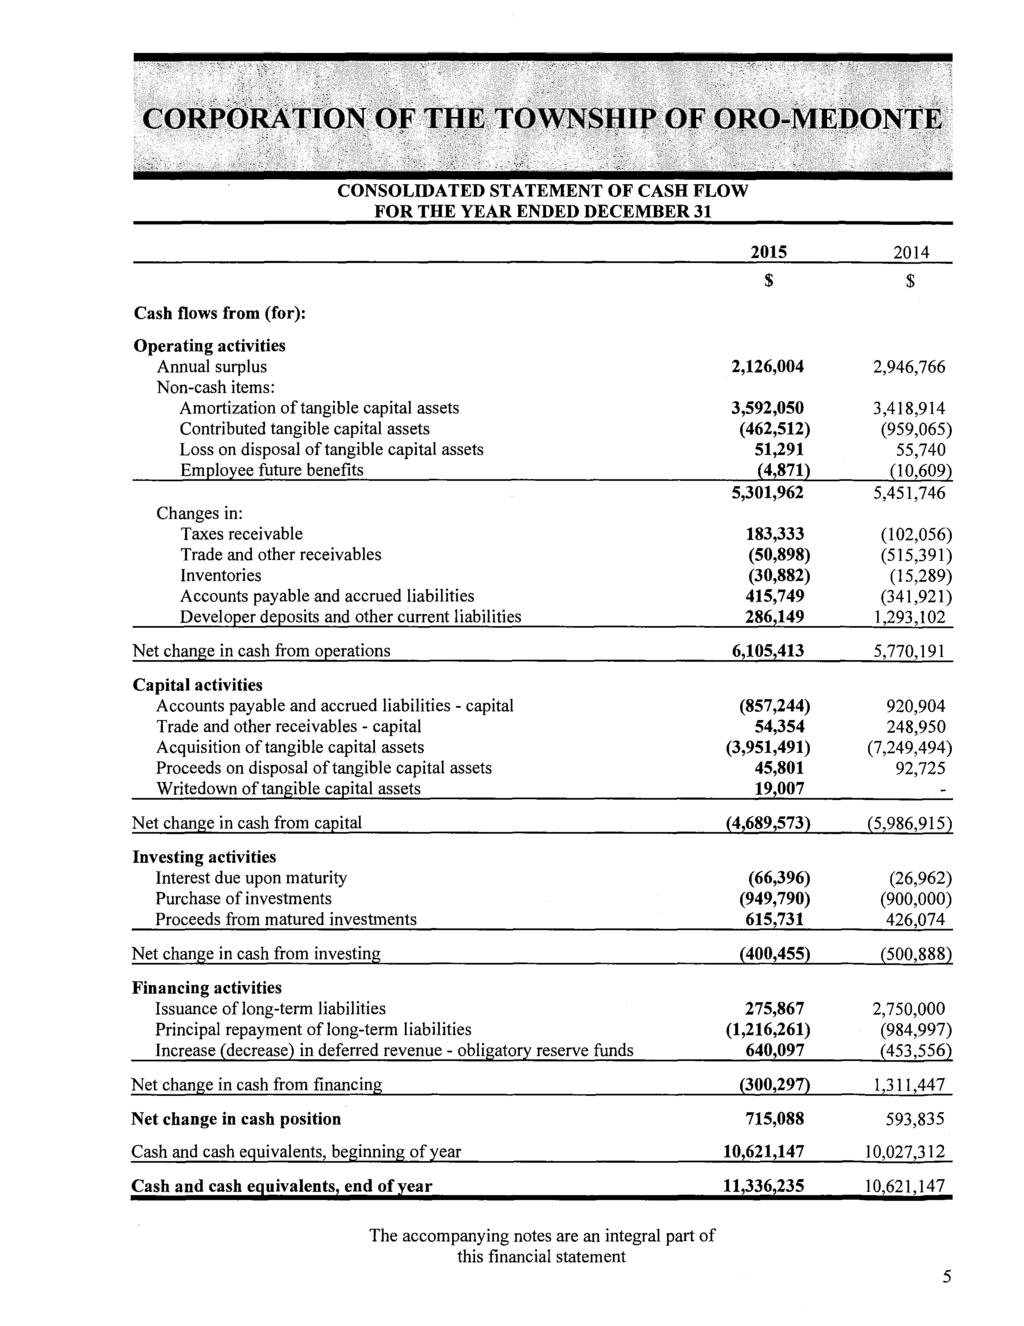 CONSOLIDATED STATEMENT OF CASH FLOW FOR THE YEAR ENDED DECEMBER 31 2015 2014 Cash flows from (for): Operating activities Annual surplus Non-cash items: Amortization of tangible capital assets